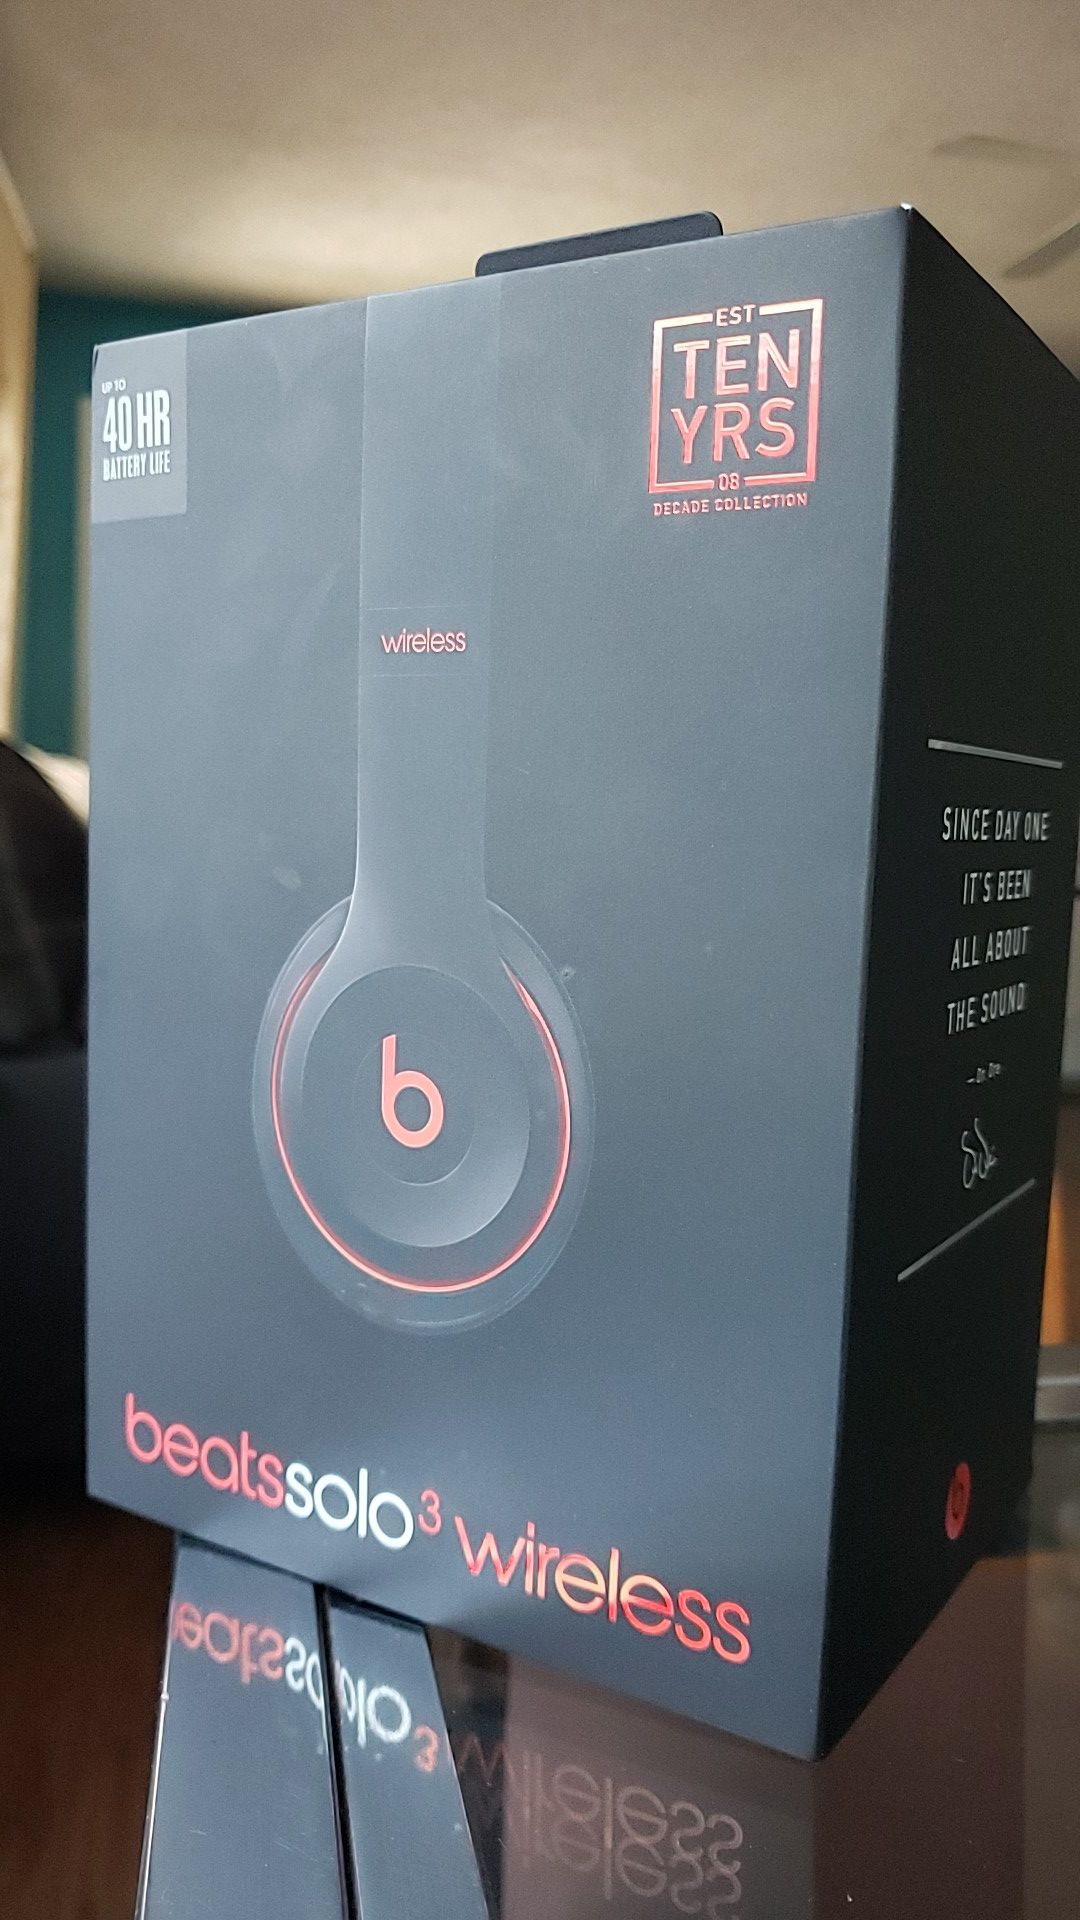 Solo beats 3 wireless comes with everything working